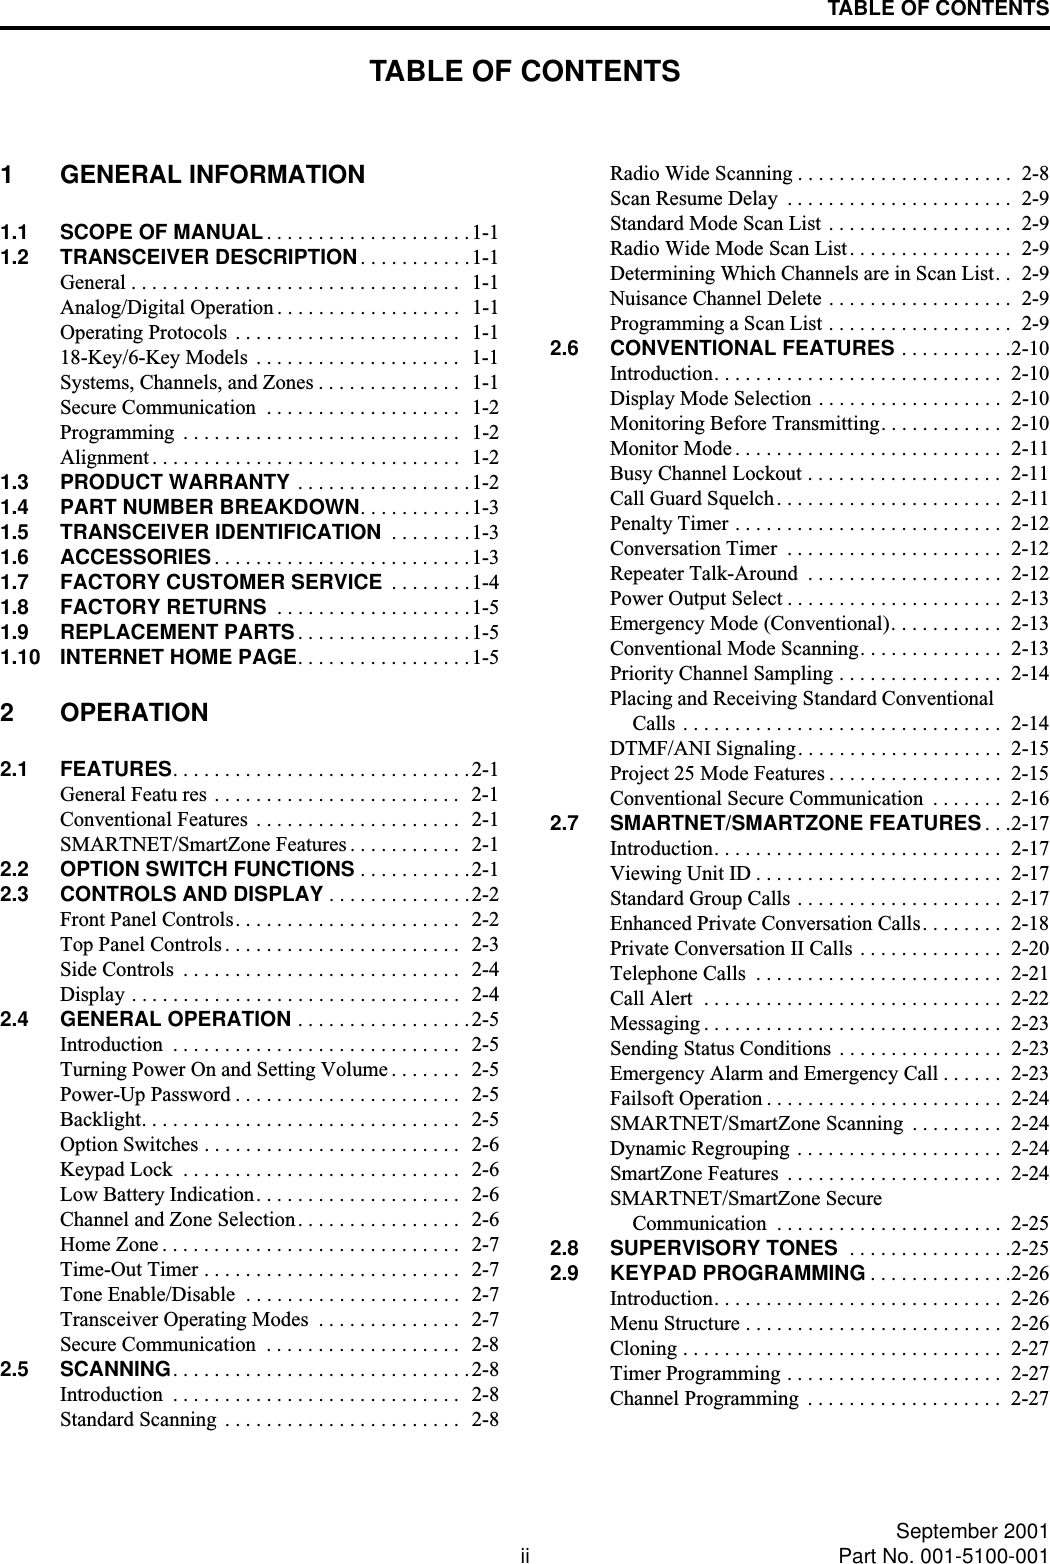 TABLE OF CONTENTSii September 2001Part No. 001-5100-001TABLE OF CONTENTS1 GENERAL INFORMATION1.1 SCOPE OF MANUAL. . . . . . . . . . . . . . . . . . . .1-11.2 TRANSCEIVER DESCRIPTION . . . . . . . . . . .1-1General . . . . . . . . . . . . . . . . . . . . . . . . . . . . . . . .  1-1Analog/Digital Operation . . . . . . . . . . . . . . . . . .  1-1Operating Protocols  . . . . . . . . . . . . . . . . . . . . . .  1-118-Key/6-Key Models  . . . . . . . . . . . . . . . . . . . .  1-1Systems, Channels, and Zones . . . . . . . . . . . . . .  1-1Secure Communication  . . . . . . . . . . . . . . . . . . .  1-2Programming  . . . . . . . . . . . . . . . . . . . . . . . . . . .  1-2Alignment . . . . . . . . . . . . . . . . . . . . . . . . . . . . . .  1-21.3 PRODUCT WARRANTY . . . . . . . . . . . . . . . . .1-21.4 PART NUMBER BREAKDOWN. . . . . . . . . . .1-31.5 TRANSCEIVER IDENTIFICATION  . . . . . . . .1-31.6 ACCESSORIES. . . . . . . . . . . . . . . . . . . . . . . . .1-31.7 FACTORY CUSTOMER SERVICE  . . . . . . . .1-41.8 FACTORY RETURNS  . . . . . . . . . . . . . . . . . . .1-51.9 REPLACEMENT PARTS. . . . . . . . . . . . . . . . .1-51.10 INTERNET HOME PAGE. . . . . . . . . . . . . . . . .1-52 OPERATION2.1 FEATURES. . . . . . . . . . . . . . . . . . . . . . . . . . . . .2-1General Featu res . . . . . . . . . . . . . . . . . . . . . . . .  2-1Conventional Features  . . . . . . . . . . . . . . . . . . . .  2-1SMARTNET/SmartZone Features . . . . . . . . . . .  2-12.2 OPTION SWITCH FUNCTIONS . . . . . . . . . . .2-12.3 CONTROLS AND DISPLAY . . . . . . . . . . . . . .2-2Front Panel Controls. . . . . . . . . . . . . . . . . . . . . .  2-2Top Panel Controls . . . . . . . . . . . . . . . . . . . . . . .   2-3Side Controls  . . . . . . . . . . . . . . . . . . . . . . . . . . .   2-4Display . . . . . . . . . . . . . . . . . . . . . . . . . . . . . . . .  2-42.4 GENERAL OPERATION . . . . . . . . . . . . . . . . .2-5Introduction  . . . . . . . . . . . . . . . . . . . . . . . . . . . .  2-5Turning Power On and Setting Volume . . . . . . .  2-5Power-Up Password . . . . . . . . . . . . . . . . . . . . . .  2-5Backlight. . . . . . . . . . . . . . . . . . . . . . . . . . . . . . .  2-5Option Switches . . . . . . . . . . . . . . . . . . . . . . . . .  2-6Keypad Lock  . . . . . . . . . . . . . . . . . . . . . . . . . . .  2-6Low Battery Indication. . . . . . . . . . . . . . . . . . . .  2-6Channel and Zone Selection. . . . . . . . . . . . . . . .   2-6Home Zone . . . . . . . . . . . . . . . . . . . . . . . . . . . . .  2-7Time-Out Timer . . . . . . . . . . . . . . . . . . . . . . . . .  2-7Tone Enable/Disable  . . . . . . . . . . . . . . . . . . . . .  2-7Transceiver Operating Modes  . . . . . . . . . . . . . .  2-7Secure Communication  . . . . . . . . . . . . . . . . . . .  2-82.5 SCANNING. . . . . . . . . . . . . . . . . . . . . . . . . . . . .2-8Introduction  . . . . . . . . . . . . . . . . . . . . . . . . . . . .  2-8Standard Scanning . . . . . . . . . . . . . . . . . . . . . . .  2-8Radio Wide Scanning . . . . . . . . . . . . . . . . . . . . .  2-8Scan Resume Delay  . . . . . . . . . . . . . . . . . . . . . .  2-9Standard Mode Scan List  . . . . . . . . . . . . . . . . . .  2-9Radio Wide Mode Scan List. . . . . . . . . . . . . . . .  2-9Determining Which Channels are in Scan List. .  2-9Nuisance Channel Delete . . . . . . . . . . . . . . . . . .  2-9Programming a Scan List . . . . . . . . . . . . . . . . . .  2-92.6 CONVENTIONAL FEATURES . . . . . . . . . . .2-10Introduction. . . . . . . . . . . . . . . . . . . . . . . . . . . .  2-10Display Mode Selection . . . . . . . . . . . . . . . . . .  2-10Monitoring Before Transmitting. . . . . . . . . . . .  2-10Monitor Mode . . . . . . . . . . . . . . . . . . . . . . . . . .  2-11Busy Channel Lockout . . . . . . . . . . . . . . . . . . .  2-11Call Guard Squelch. . . . . . . . . . . . . . . . . . . . . .  2-11Penalty Timer . . . . . . . . . . . . . . . . . . . . . . . . . .  2-12Conversation Timer  . . . . . . . . . . . . . . . . . . . . .  2-12Repeater Talk-Around  . . . . . . . . . . . . . . . . . . .  2-12Power Output Select . . . . . . . . . . . . . . . . . . . . .  2-13Emergency Mode (Conventional). . . . . . . . . . .  2-13Conventional Mode Scanning. . . . . . . . . . . . . .  2-13Priority Channel Sampling . . . . . . . . . . . . . . . .  2-14Placing and Receiving Standard ConventionalCalls  . . . . . . . . . . . . . . . . . . . . . . . . . . . . . . .  2-14DTMF/ANI Signaling. . . . . . . . . . . . . . . . . . . .  2-15Project 25 Mode Features . . . . . . . . . . . . . . . . .  2-15Conventional Secure Communication  . . . . . . .  2-162.7 SMARTNET/SMARTZONE FEATURES . . .2-17Introduction. . . . . . . . . . . . . . . . . . . . . . . . . . . .  2-17Viewing Unit ID . . . . . . . . . . . . . . . . . . . . . . . .  2-17Standard Group Calls . . . . . . . . . . . . . . . . . . . .  2-17Enhanced Private Conversation Calls. . . . . . . .  2-18Private Conversation II Calls . . . . . . . . . . . . . .  2-20Telephone Calls  . . . . . . . . . . . . . . . . . . . . . . . .  2-21Call Alert  . . . . . . . . . . . . . . . . . . . . . . . . . . . . .  2-22Messaging . . . . . . . . . . . . . . . . . . . . . . . . . . . . .  2-23Sending Status Conditions  . . . . . . . . . . . . . . . .  2-23Emergency Alarm and Emergency Call . . . . . .  2-23Failsoft Operation . . . . . . . . . . . . . . . . . . . . . . .  2-24SMARTNET/SmartZone Scanning  . . . . . . . . .  2-24Dynamic Regrouping . . . . . . . . . . . . . . . . . . . .  2-24SmartZone Features  . . . . . . . . . . . . . . . . . . . . .  2-24SMARTNET/SmartZone SecureCommunication  . . . . . . . . . . . . . . . . . . . . . .  2-252.8 SUPERVISORY TONES  . . . . . . . . . . . . . . . .2-252.9 KEYPAD PROGRAMMING . . . . . . . . . . . . . .2-26Introduction. . . . . . . . . . . . . . . . . . . . . . . . . . . .  2-26Menu Structure . . . . . . . . . . . . . . . . . . . . . . . . .  2-26Cloning . . . . . . . . . . . . . . . . . . . . . . . . . . . . . . .  2-27Timer Programming . . . . . . . . . . . . . . . . . . . . .  2-27Channel Programming  . . . . . . . . . . . . . . . . . . .  2-27